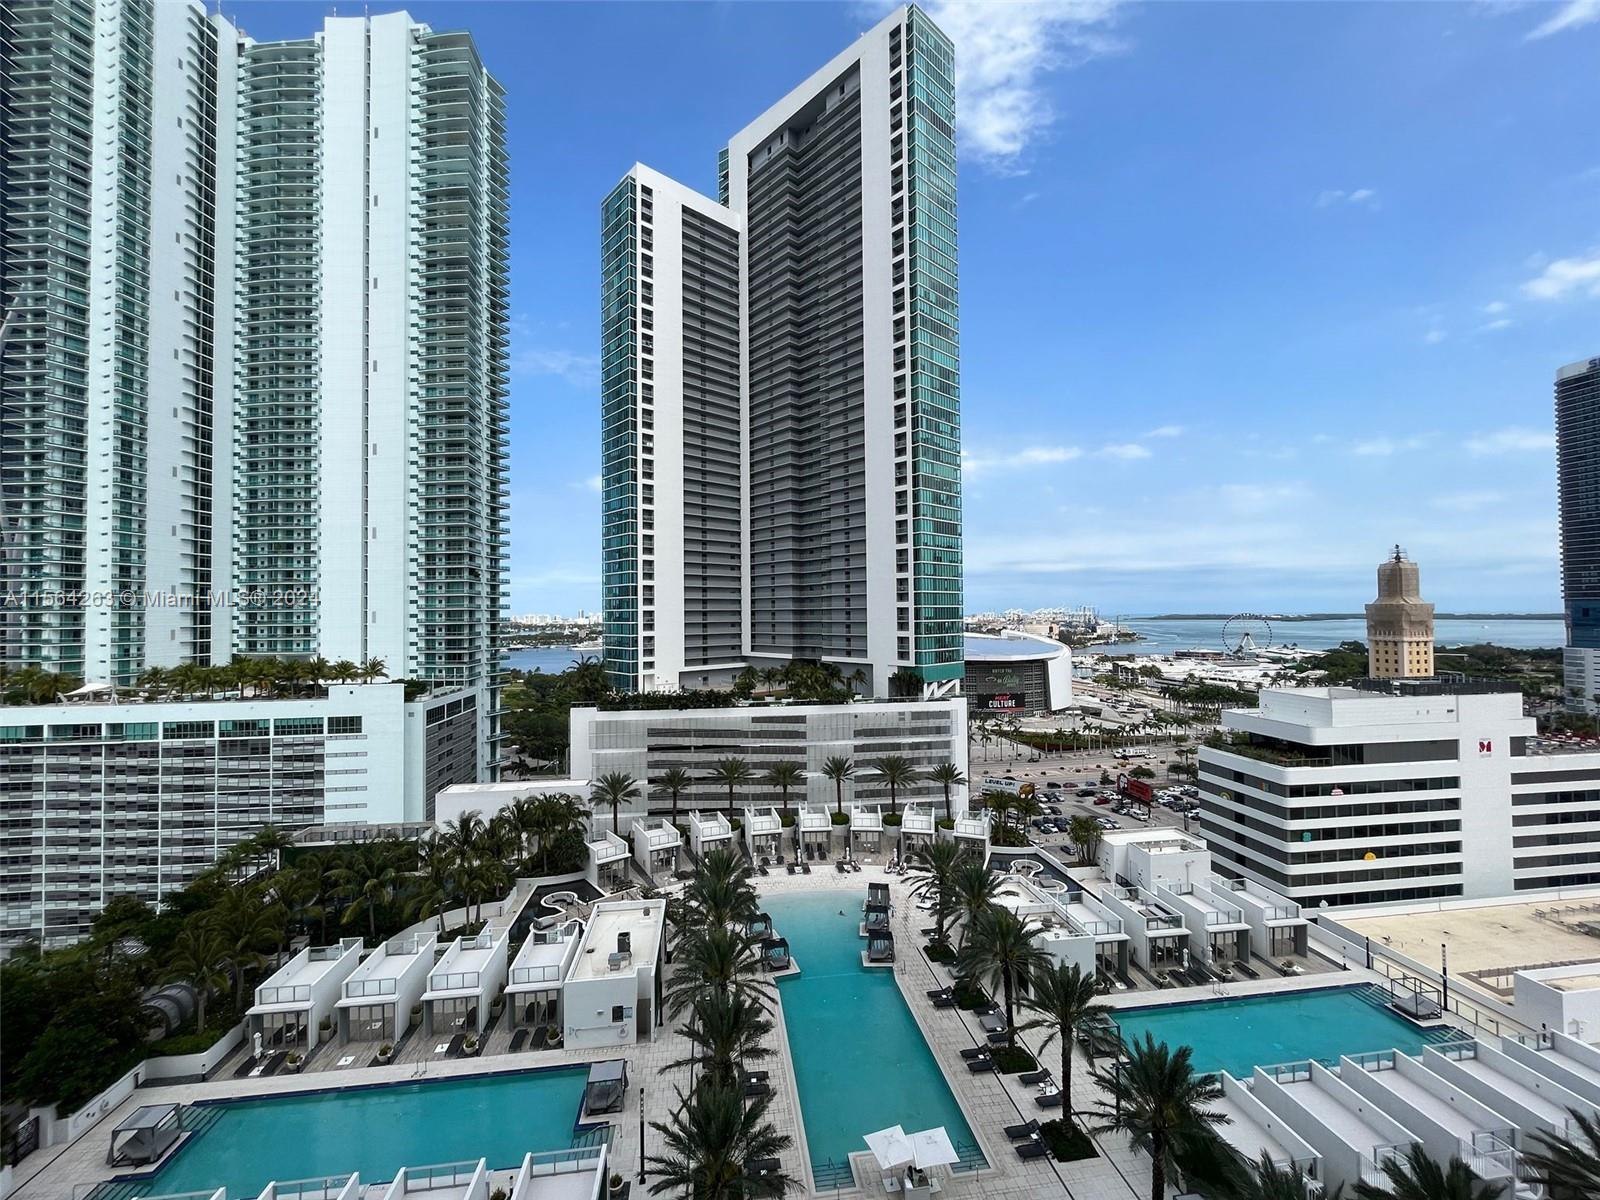 Beautiful modern 2/2 apartment located in downtown Miami right by the Miami Heat Arena, Bayside Marketplace and the Frost Museum. Minutes to Brickell, Wynwood, Miami Design District, Midtown, and South Beach. You can't find a better location then this! White flooring throughout, open concept kitchen, walk in closets, beautiful bathrooms (especially the master with light mirrors, bathtub, and walk in shower). Huge balcony with partial pool view, ocean view, and area view. 5-star resort style amenities; pool, cabanas, social lounges, spa, salon, kids room, BBQ, basketball and tennis courts, yoga studio, an incredible gym with everything you can think of! 24 hour valet and front desk! FUNDS REQUIRED TO MOVE IN WILL BE EQUAL TO 3 MONTHS OF RENT. MOVE IN READY!